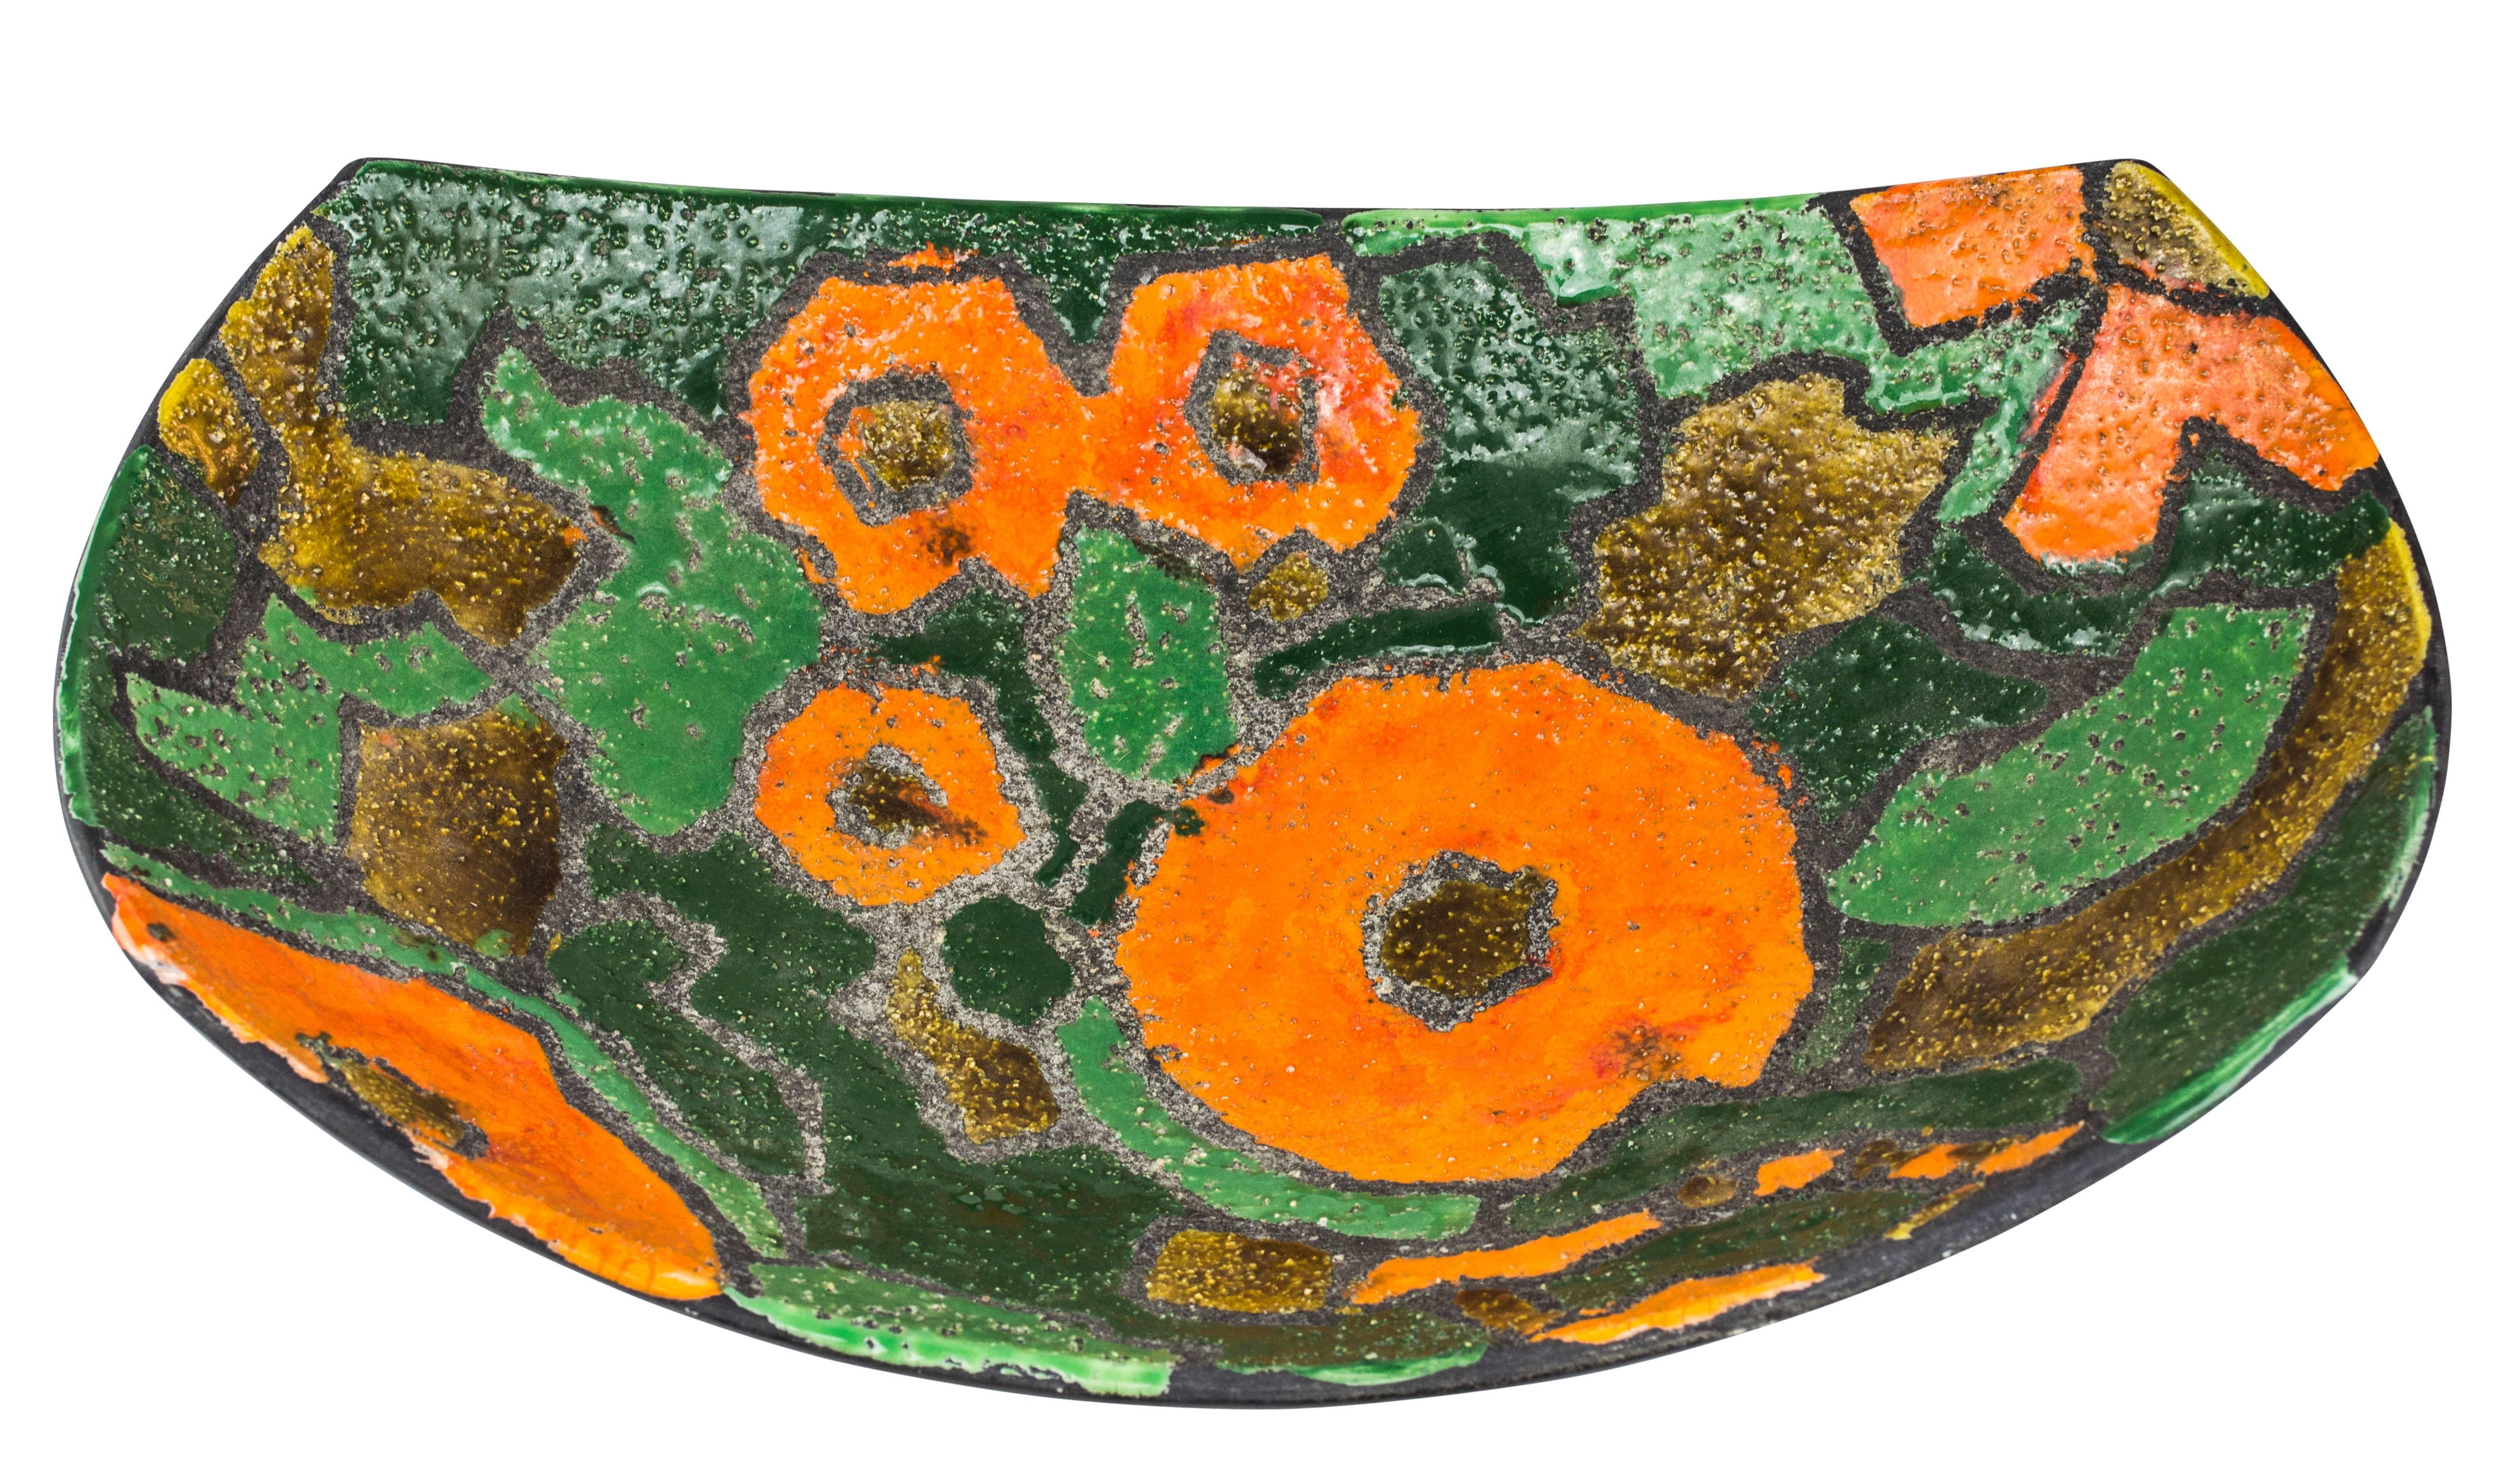 Bitossi Raymor Ceramic Bowl Alvino Bagni Scoop Orange Green Signed Italy 1960's. Medium to large scale scoop form ceramic bowl with floral pattern in bright 1960's colors with a textured sand glaze. Alvino Bagni designed ceramics for Bitossi.